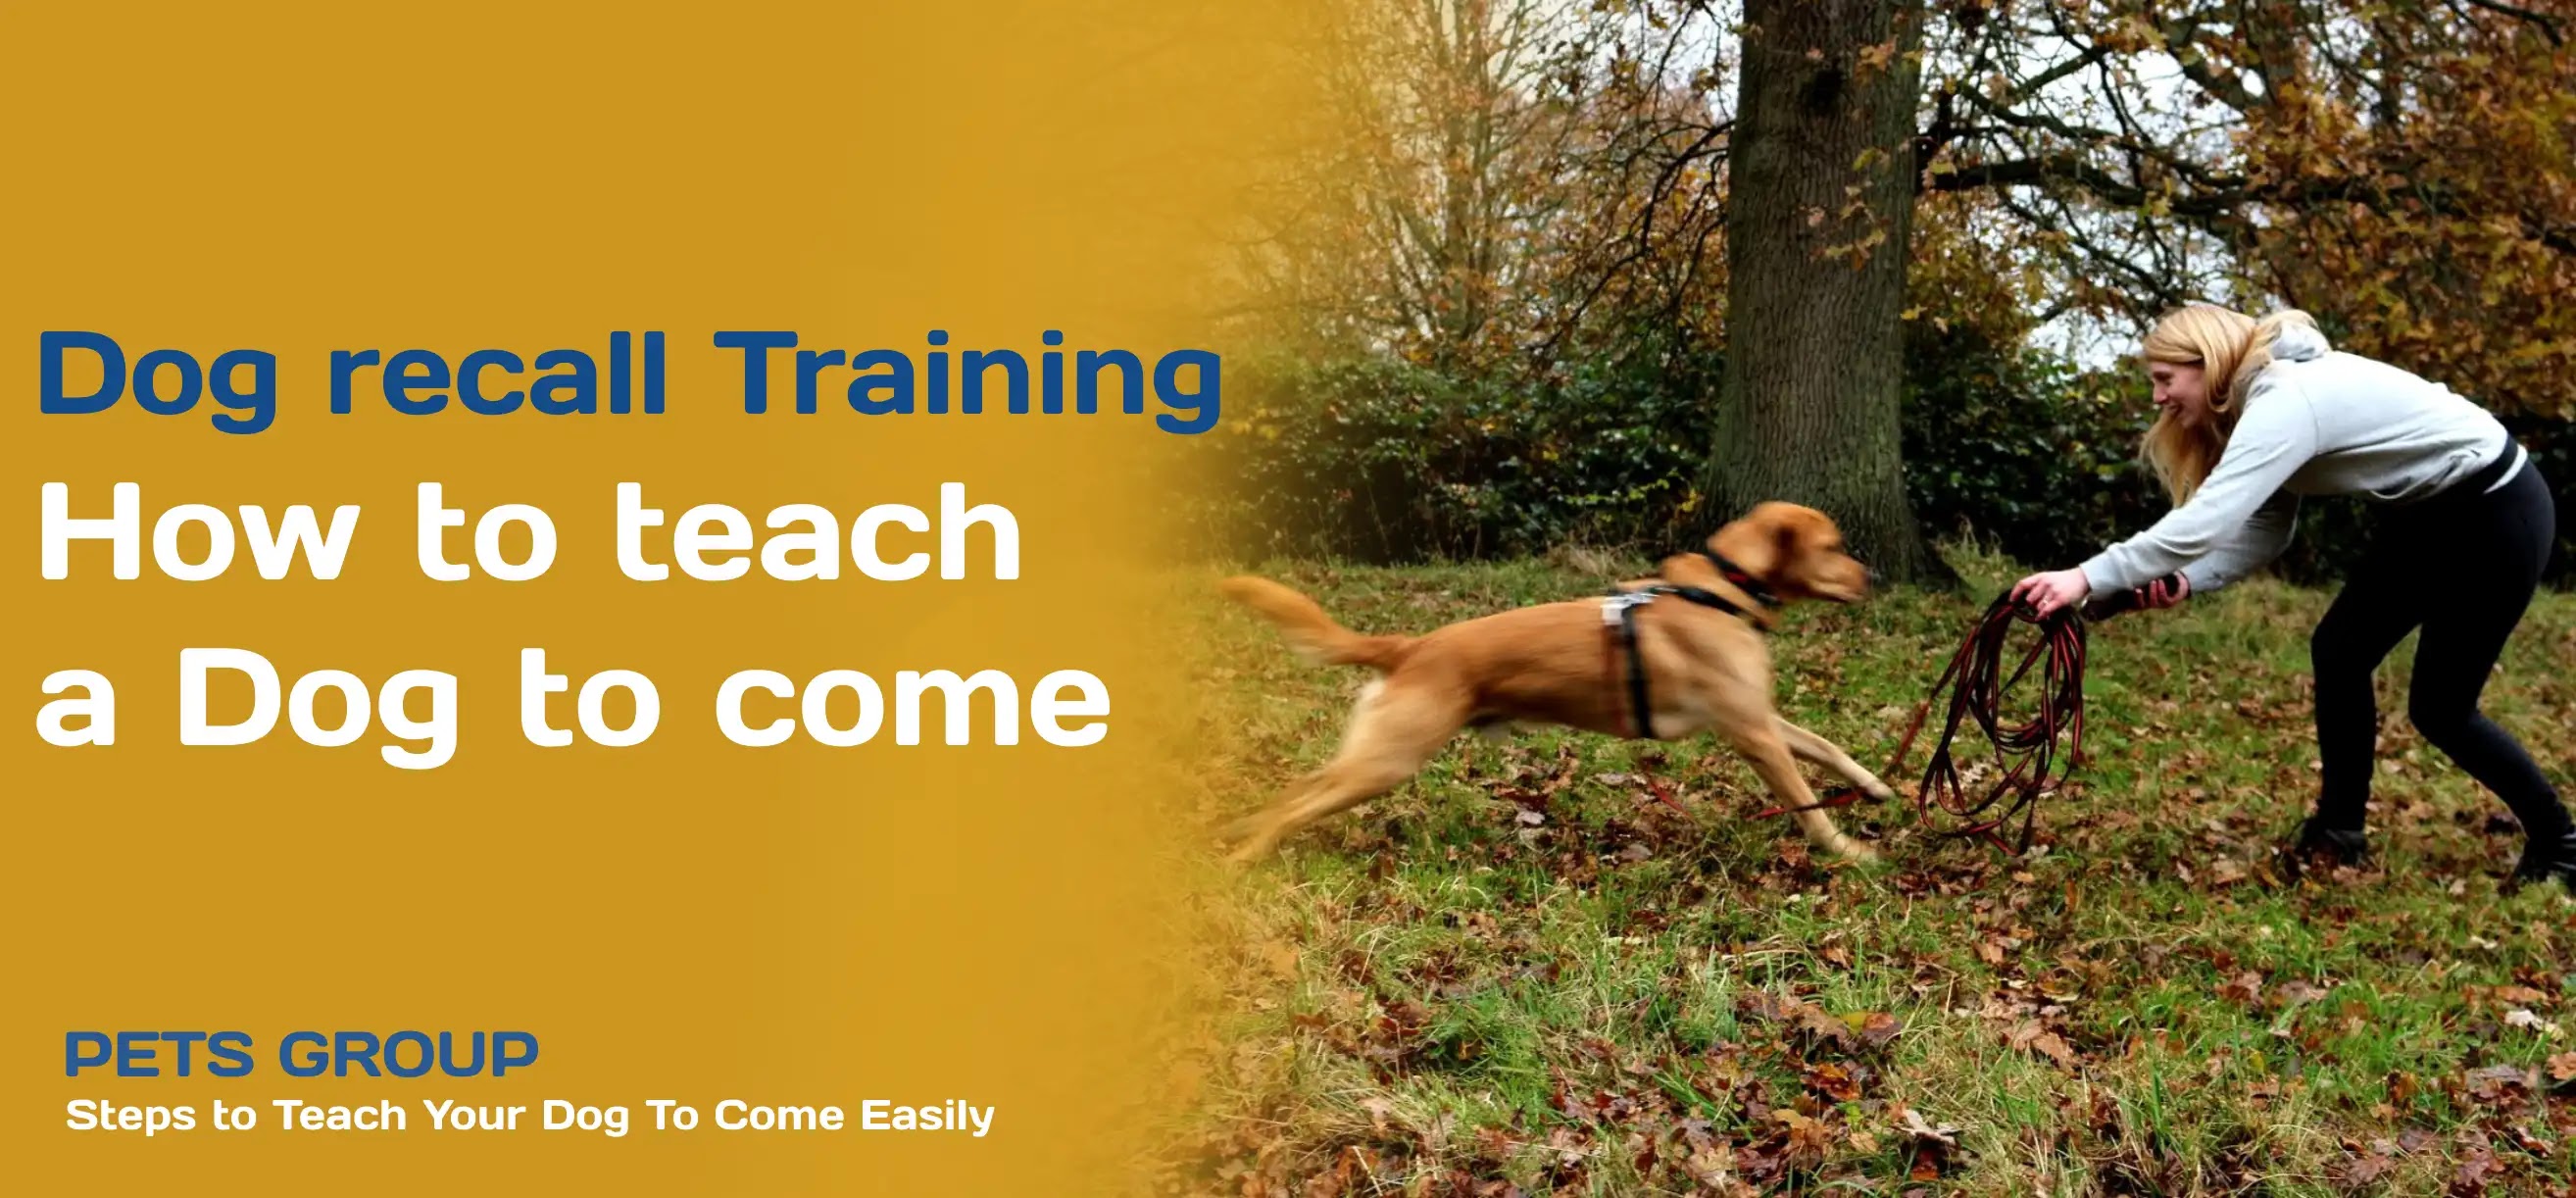 How To Teach Your Dog To Come In 3 Easy Steps - Dog recall training